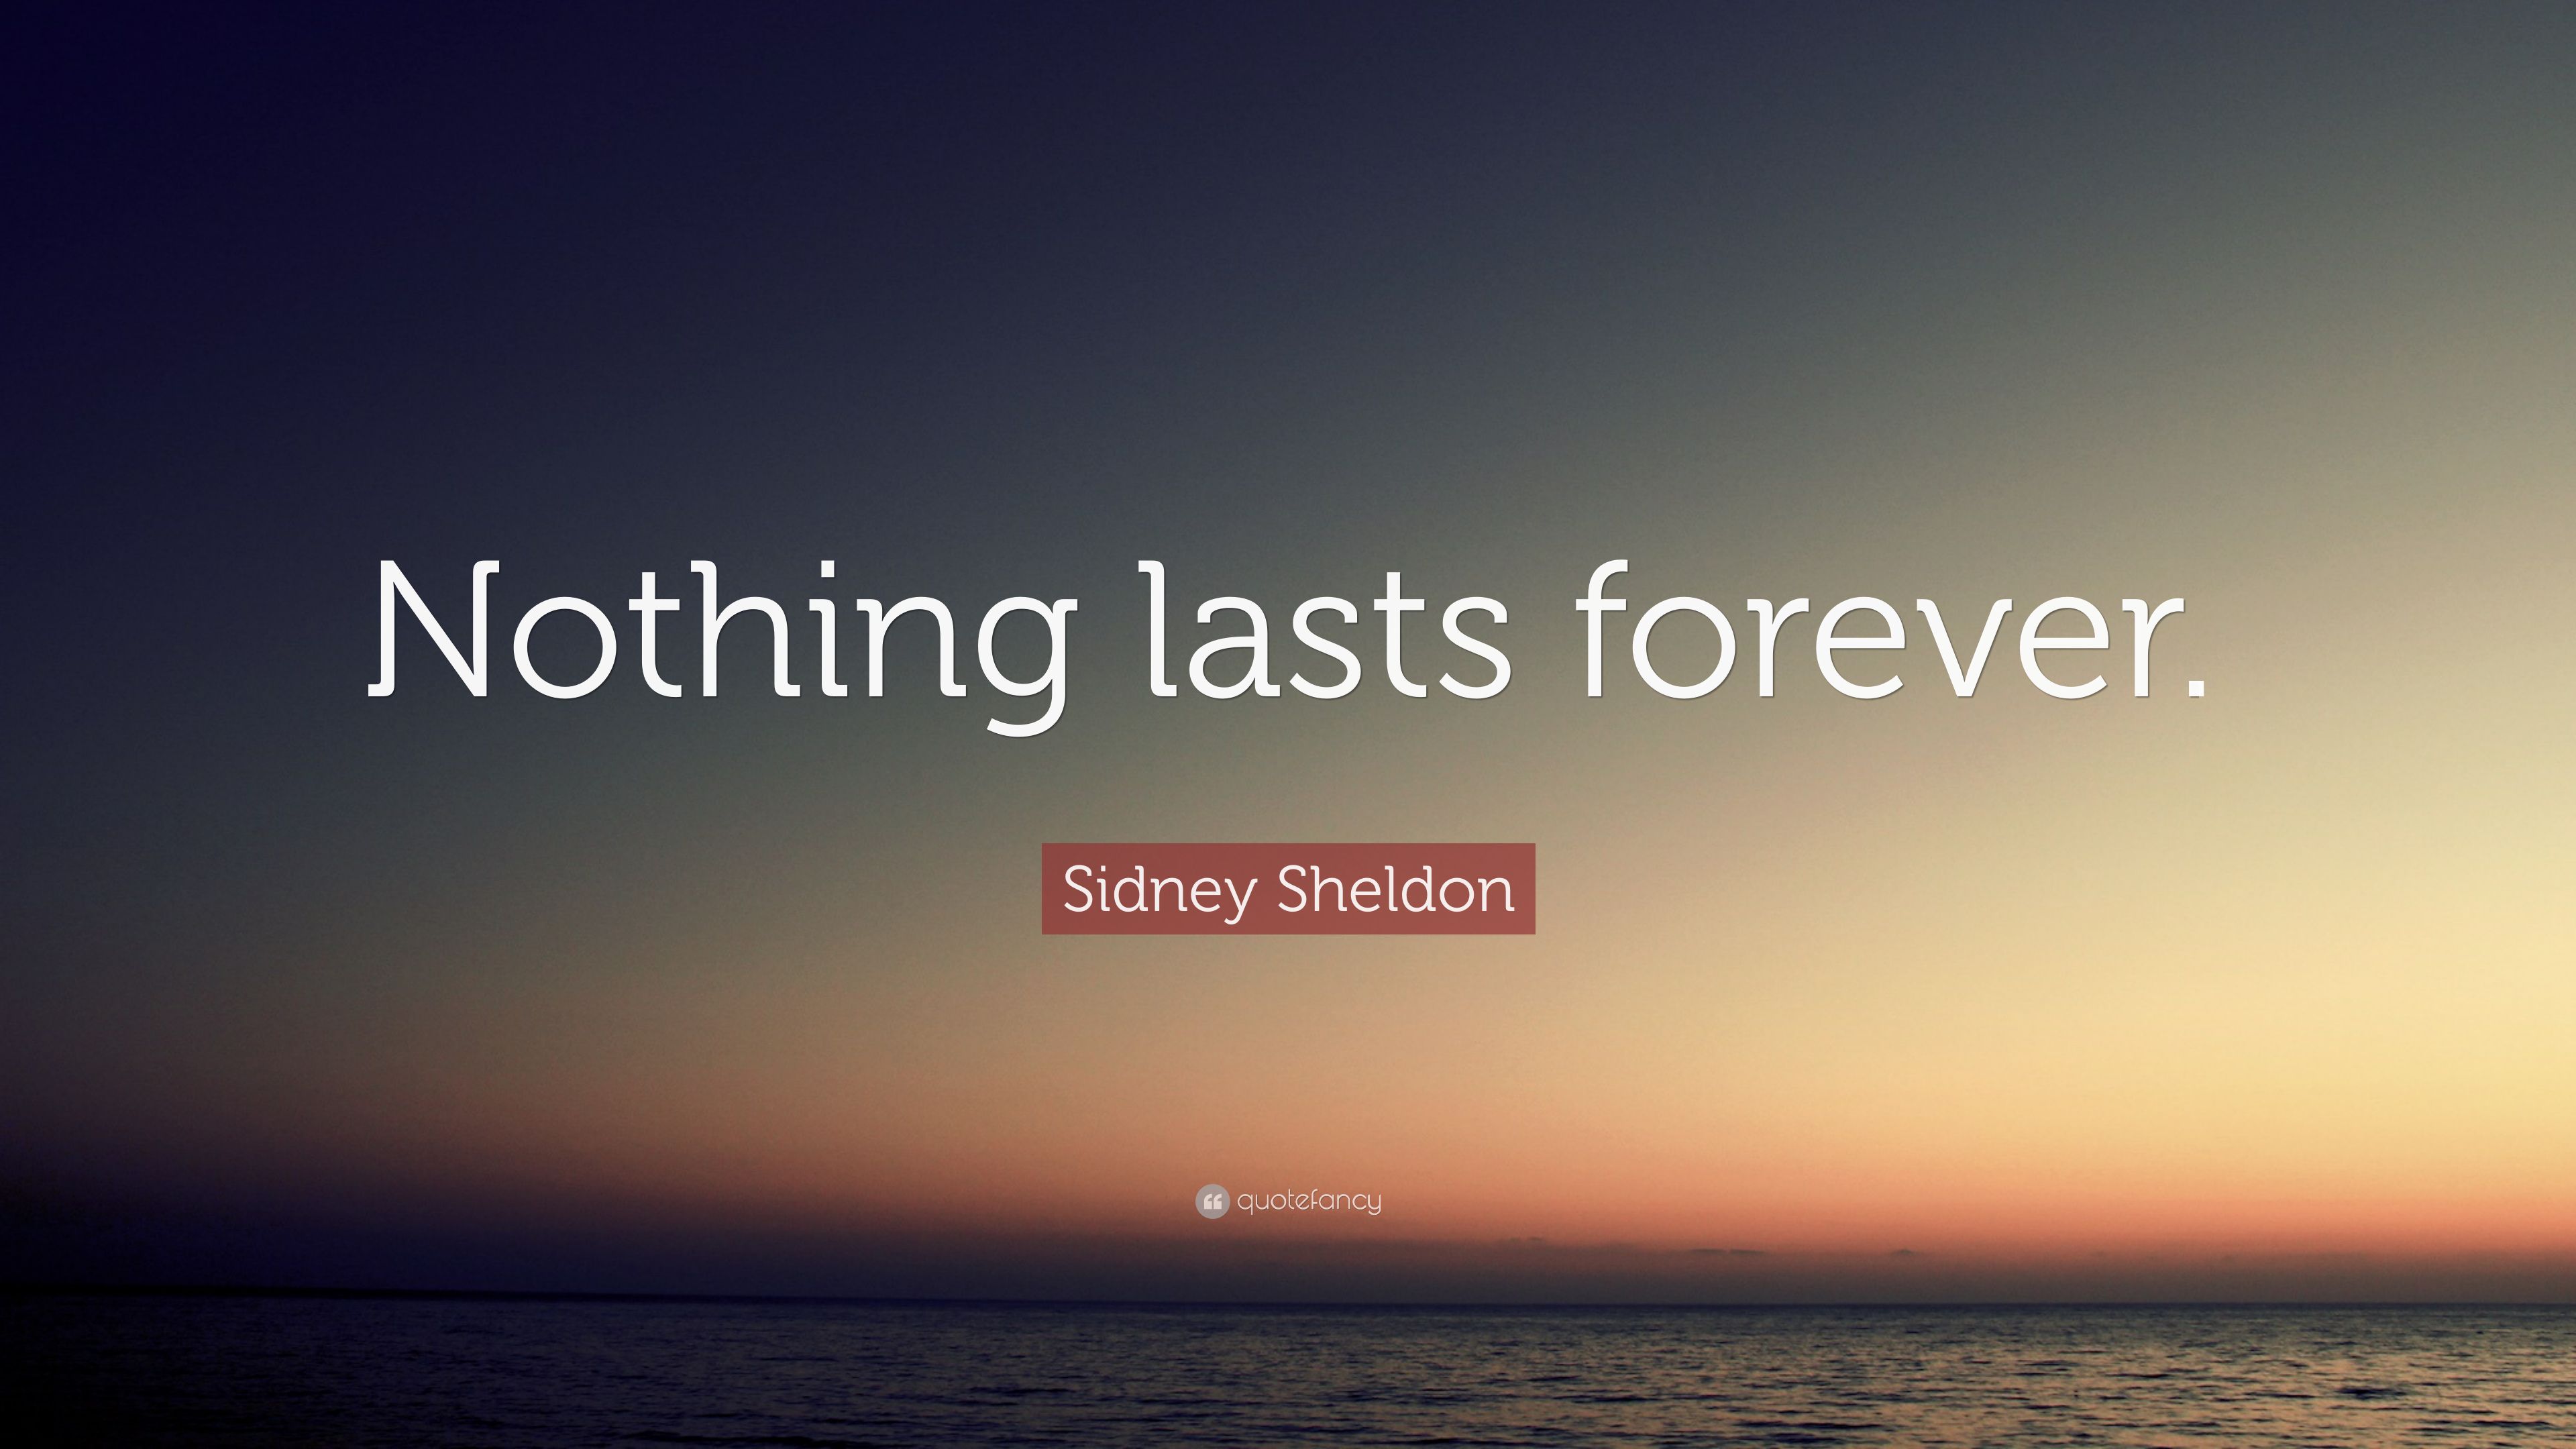 Sidney Sheldon Quote: “Nothing lasts forever.” (6 wallpaper)